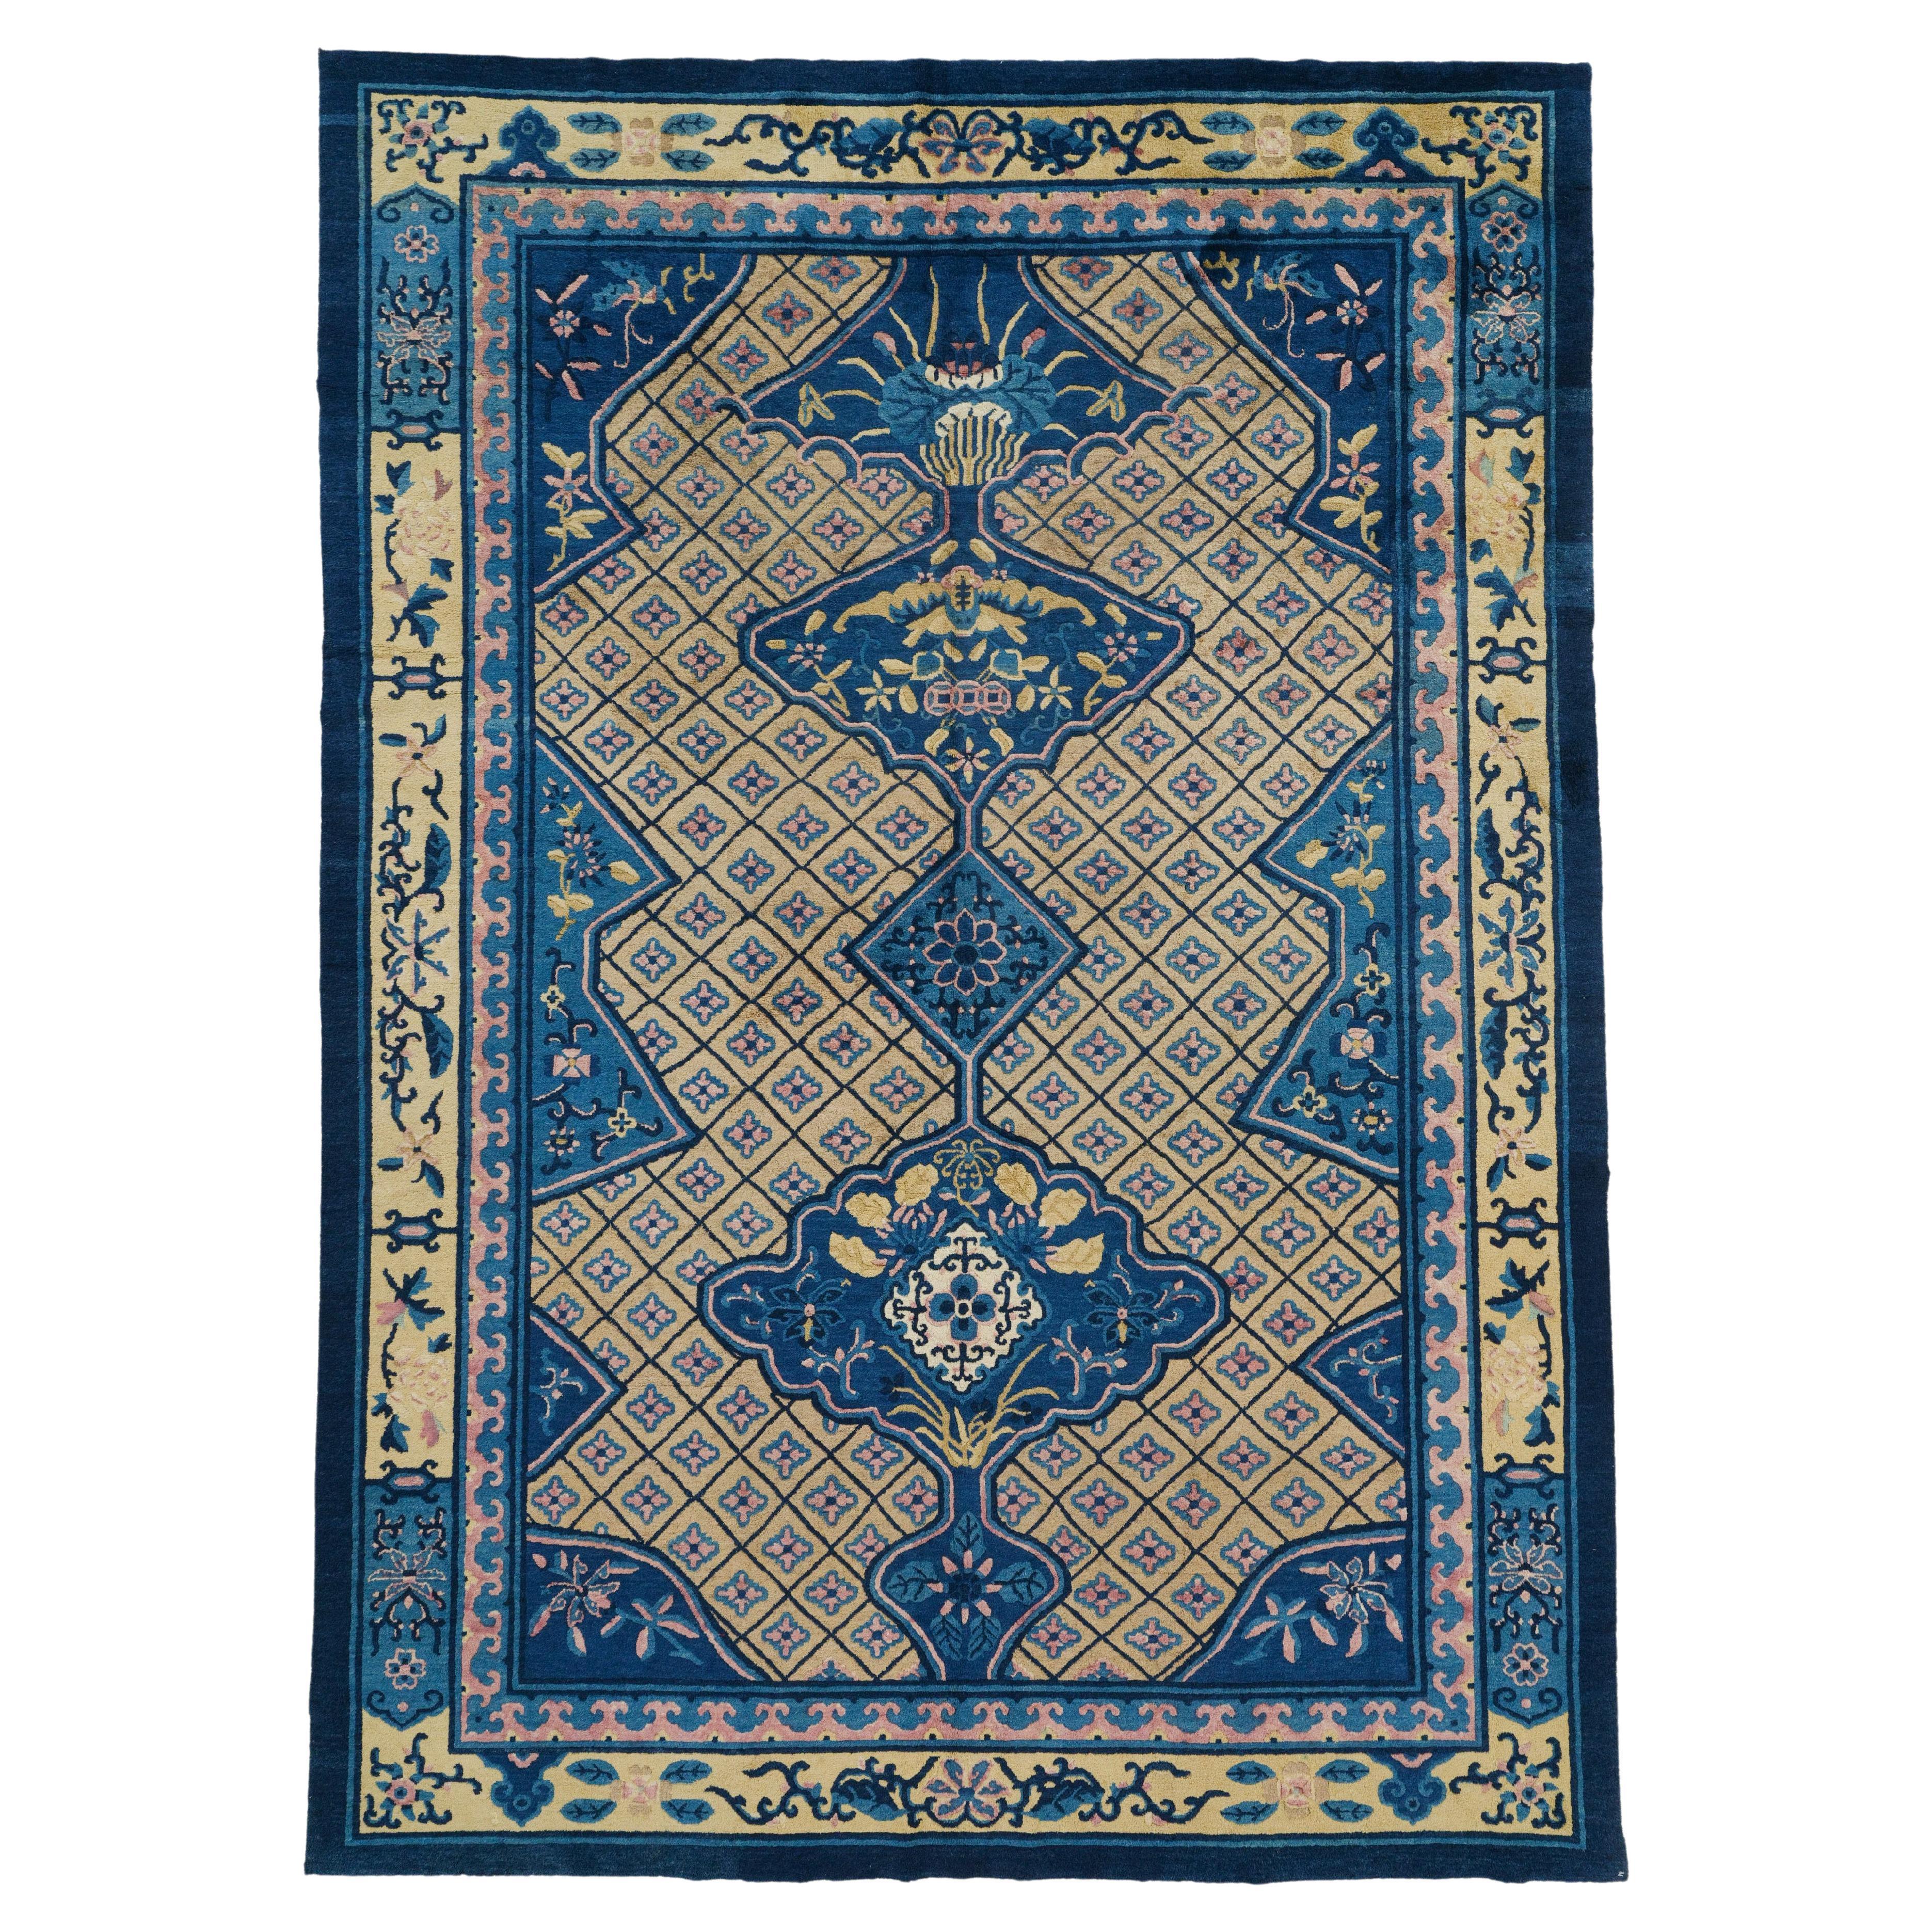 Antique Chinese Rug - Late 19th Century Antique Chinese Rug, Antique Chinese Rug For Sale